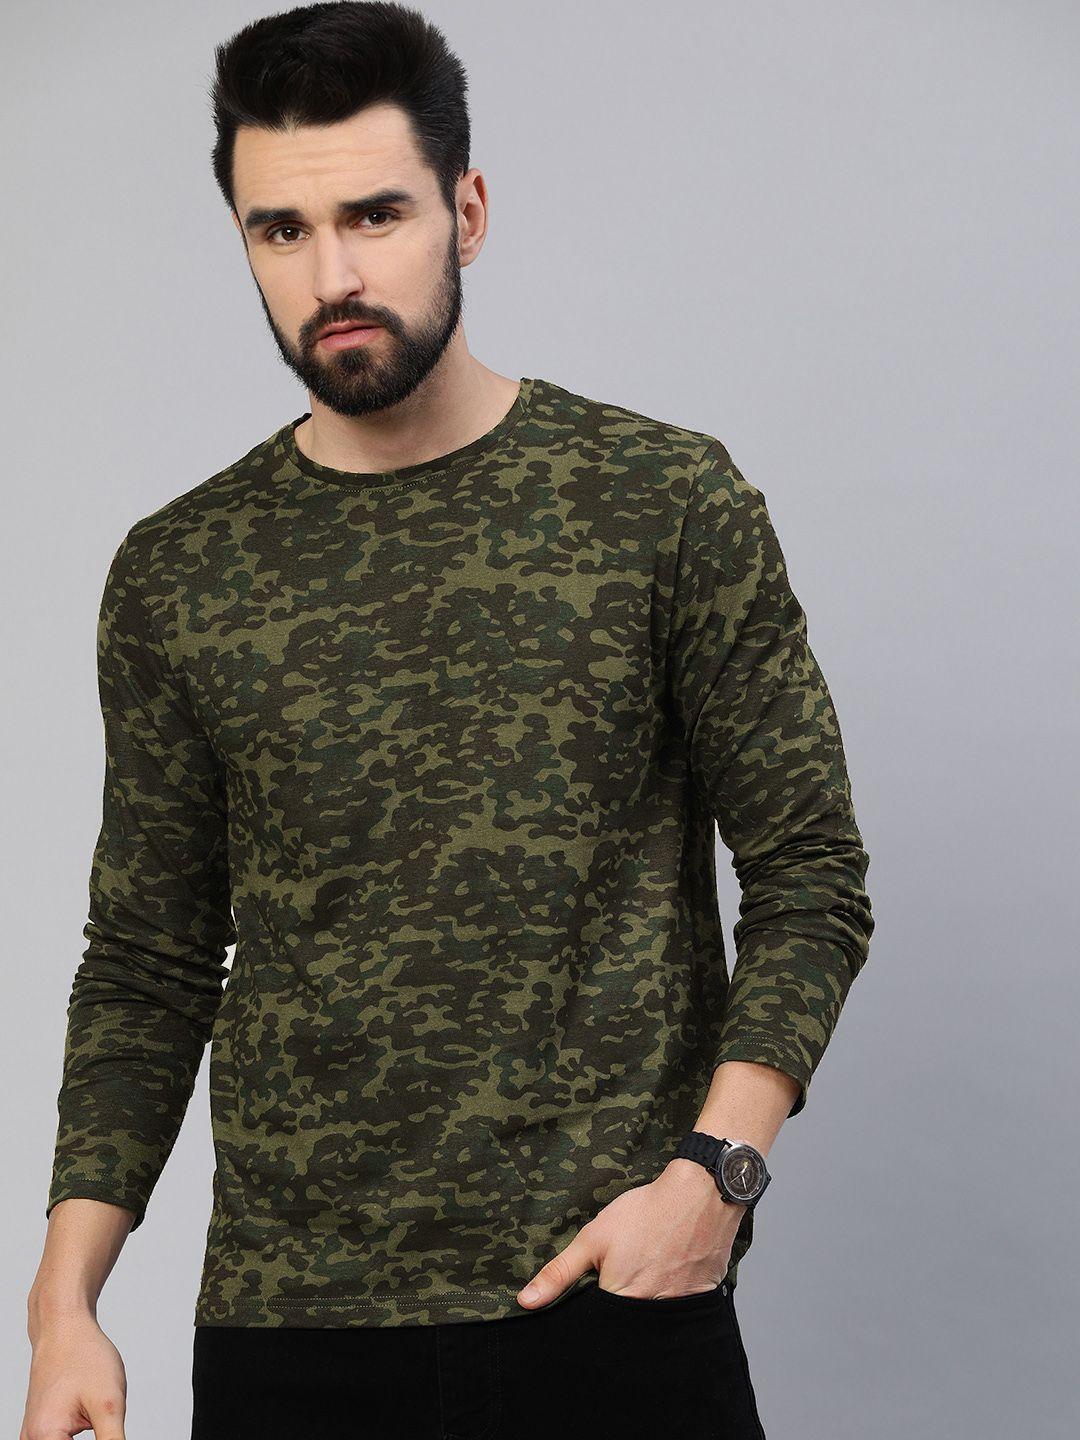 urbano fashion men olive green camouflage printed pure cotton slim fit t-shirt